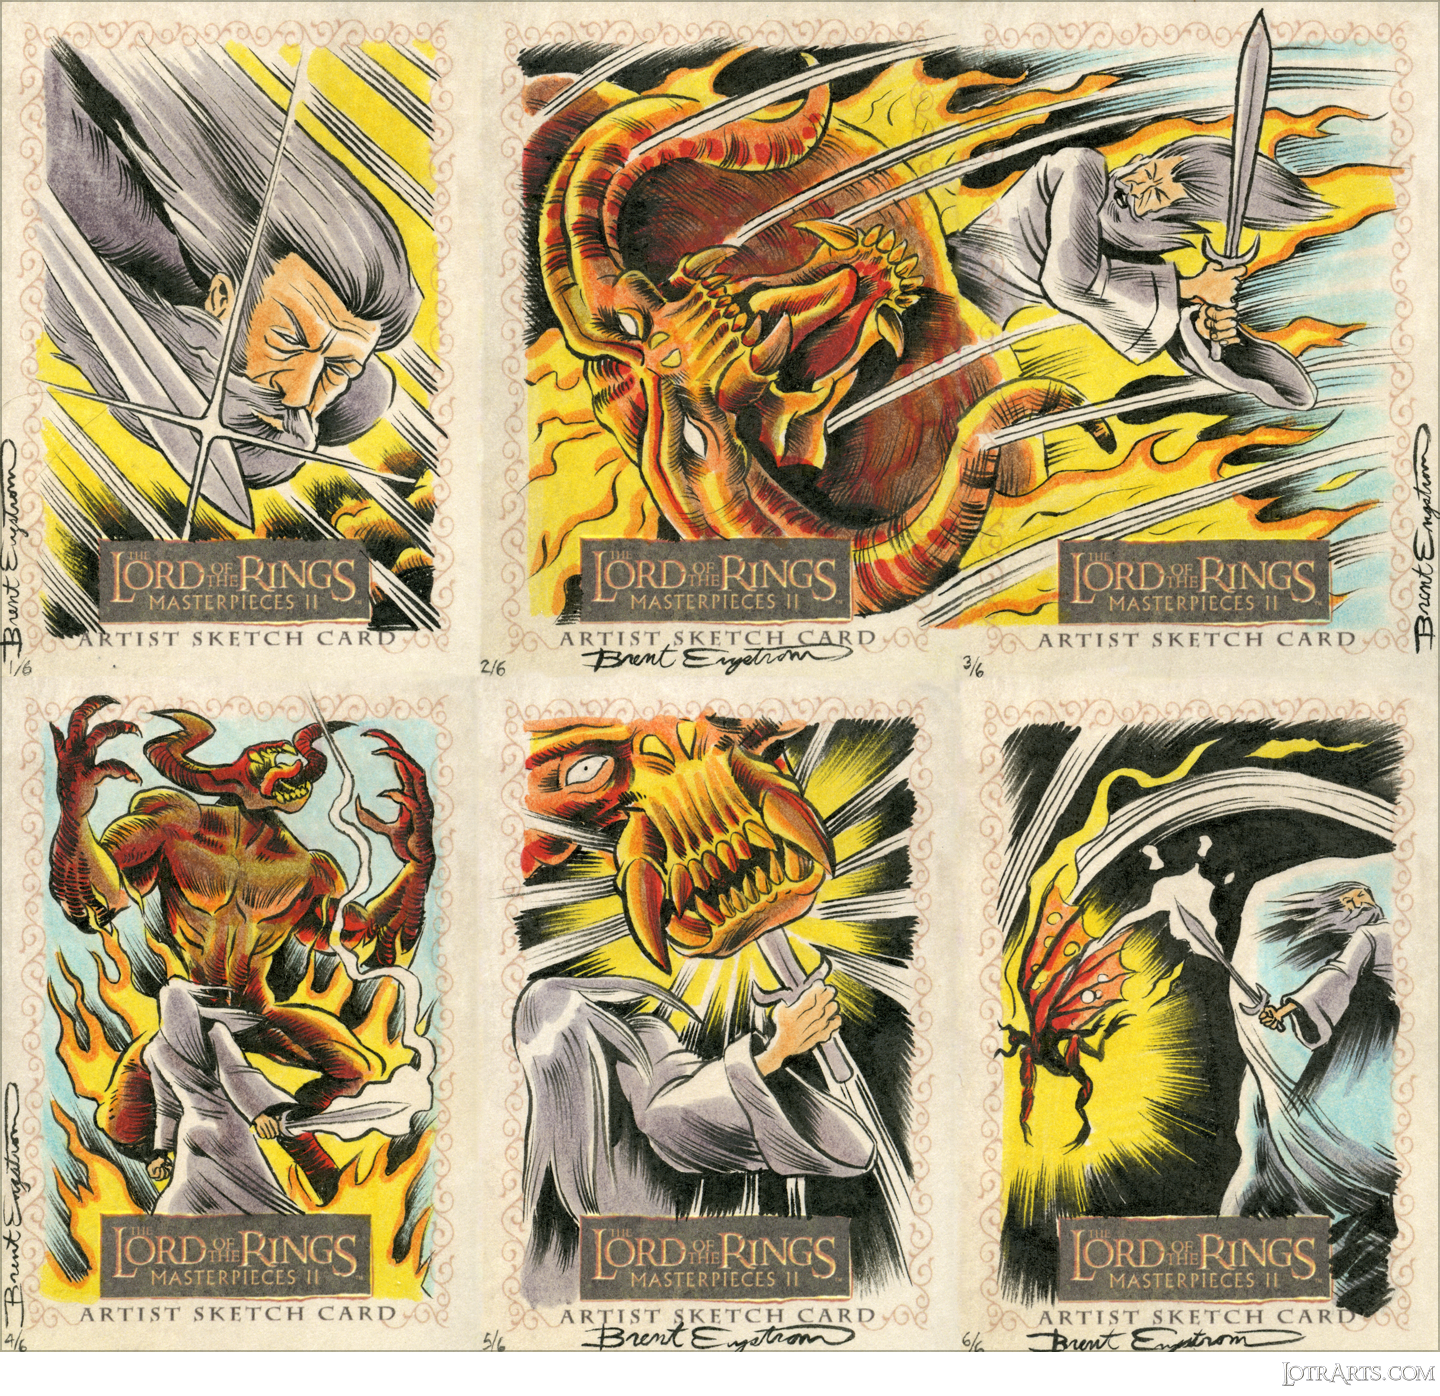 Battle of the Balrog and Gandalf, six-card sequenced scene panel, by Engstrom: artist return sketches<span class="ngViews">17 views</span>